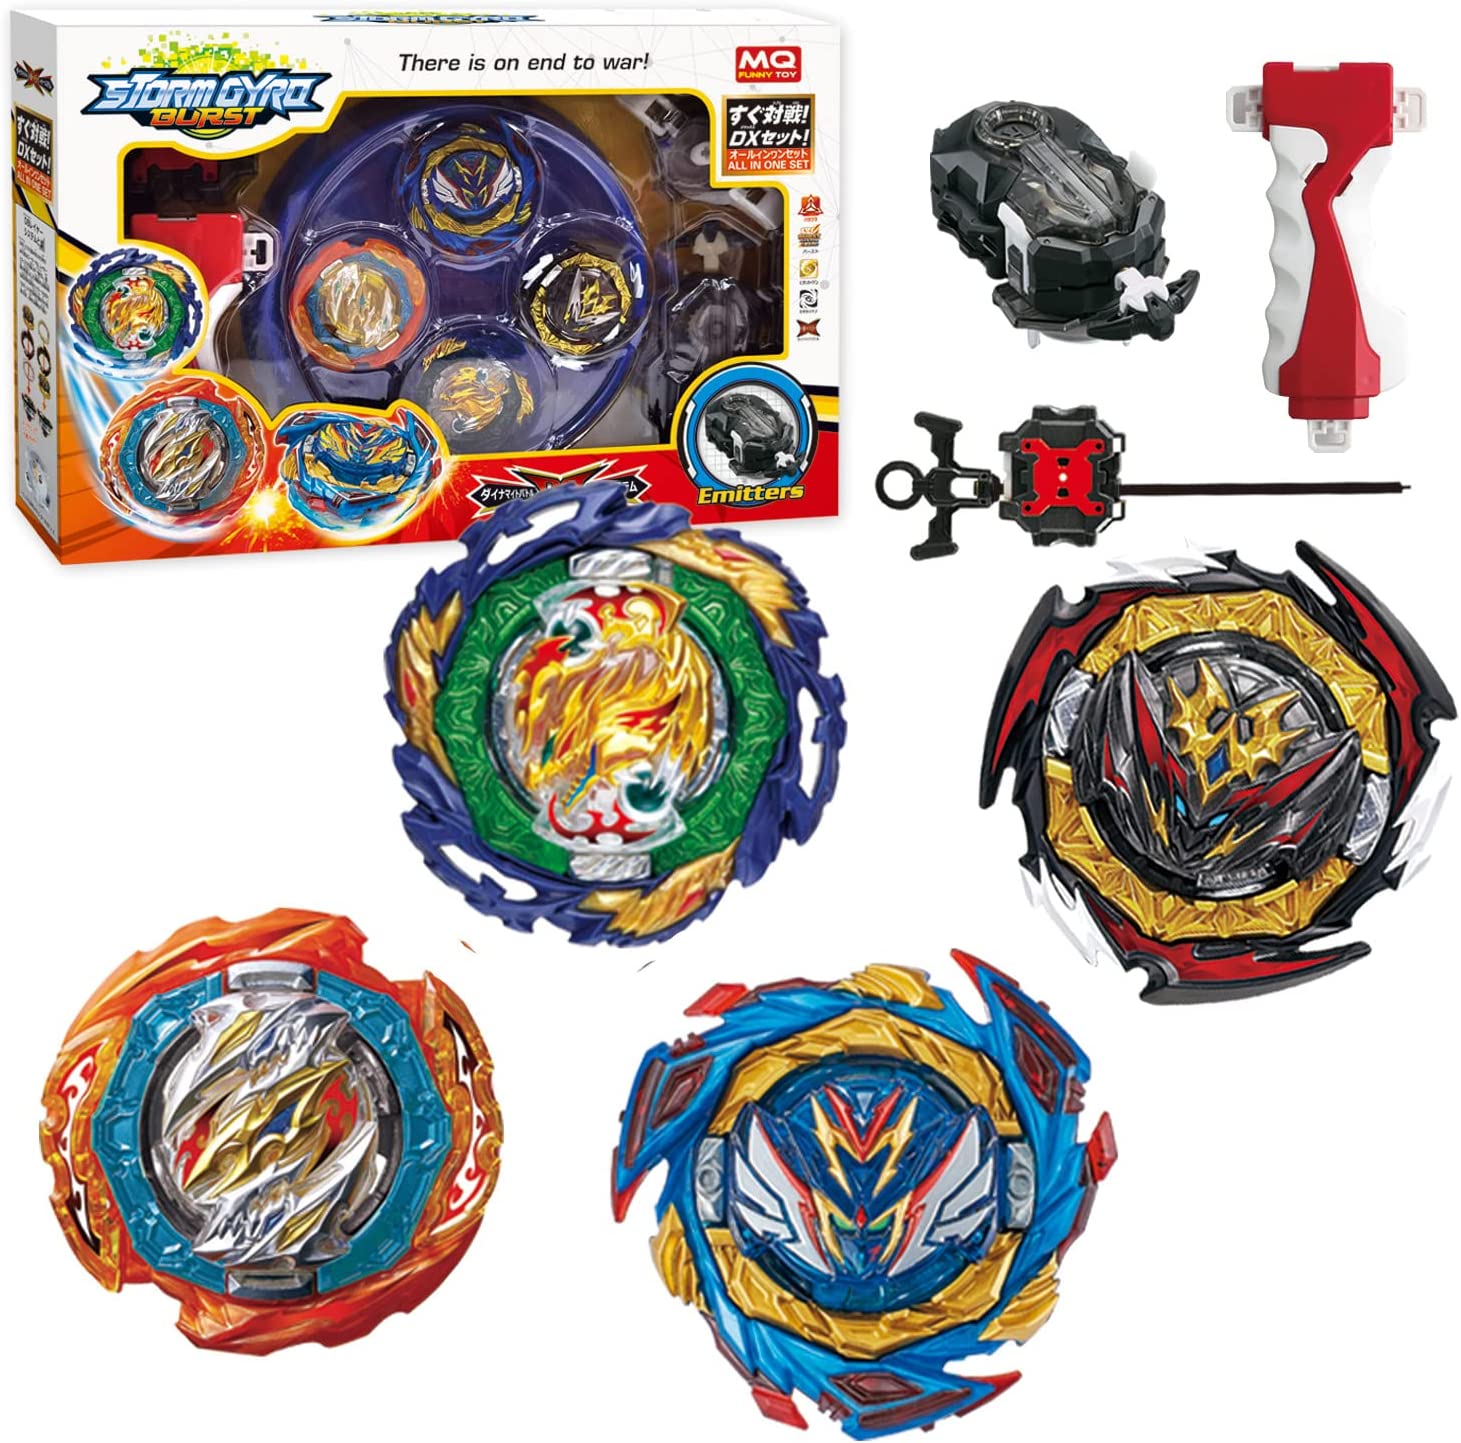 Beyblade Burst B169 B170 Metal Blade Launchers Ultimate Kids Toy Gift ▻   ▻ Free Shipping ▻ Up to 70% OFF